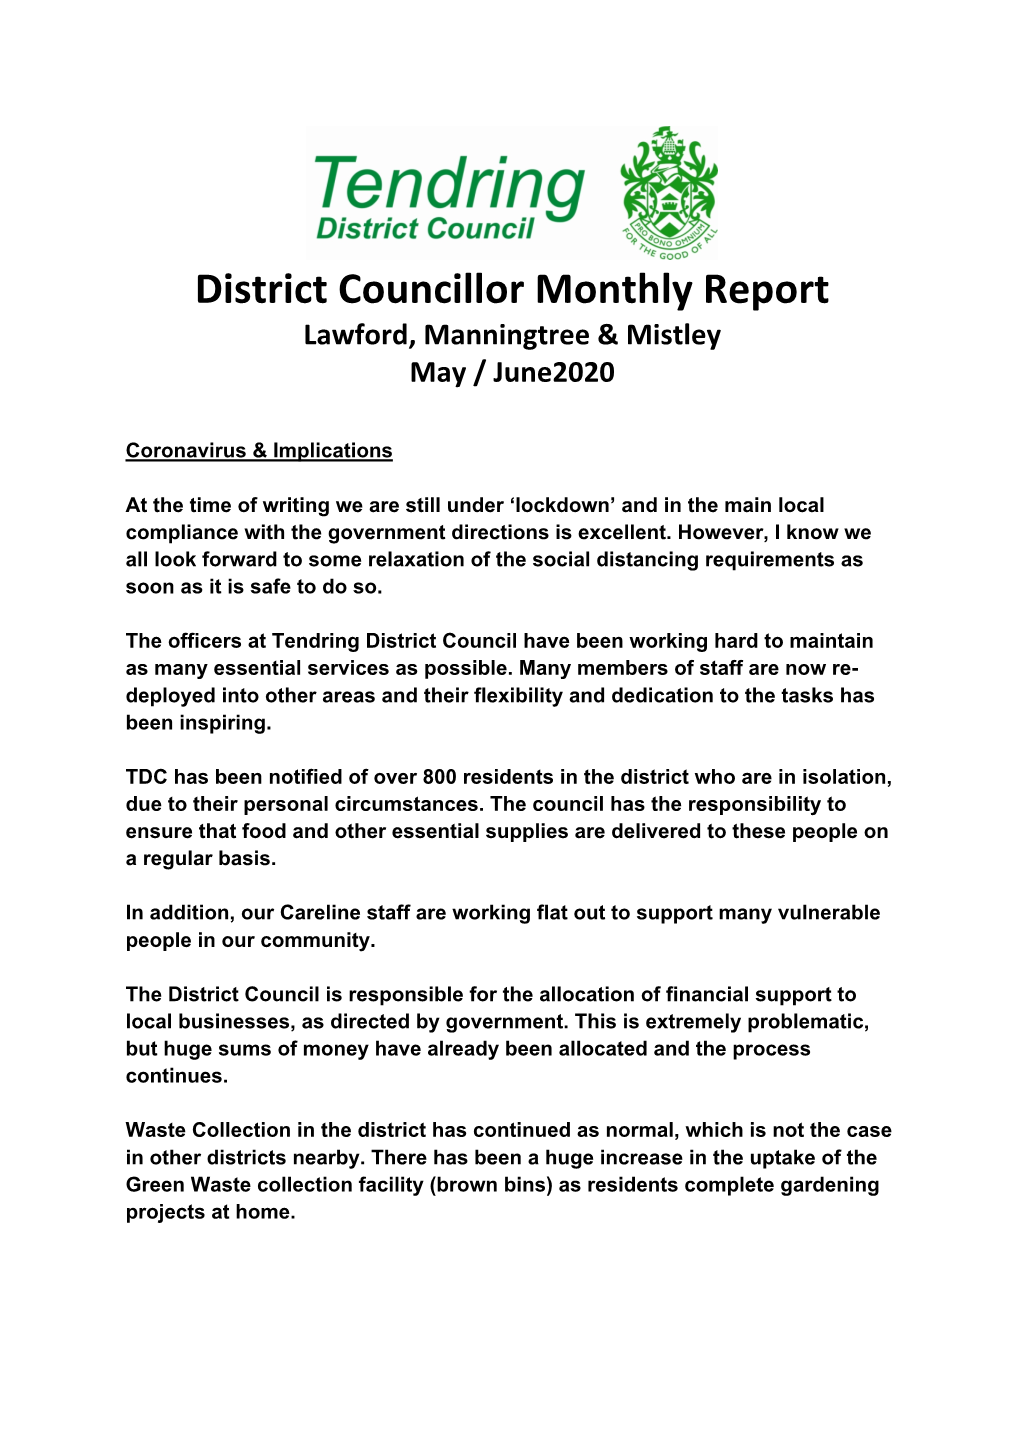 District Councillor Monthly Report Lawford, Manningtree & Mistley May / June2020